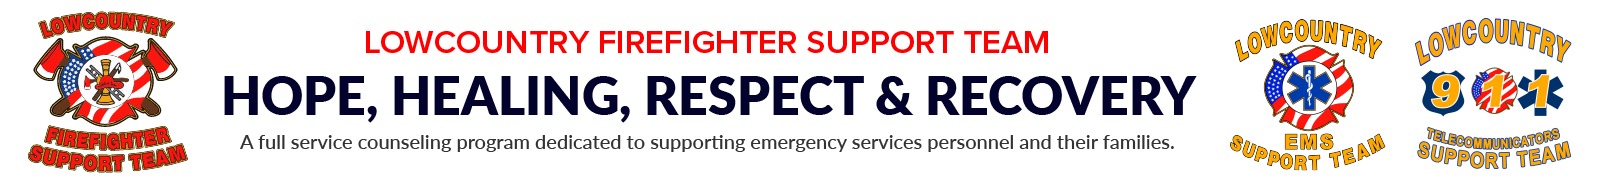 Lowcountry Firefighter Support Team Logo